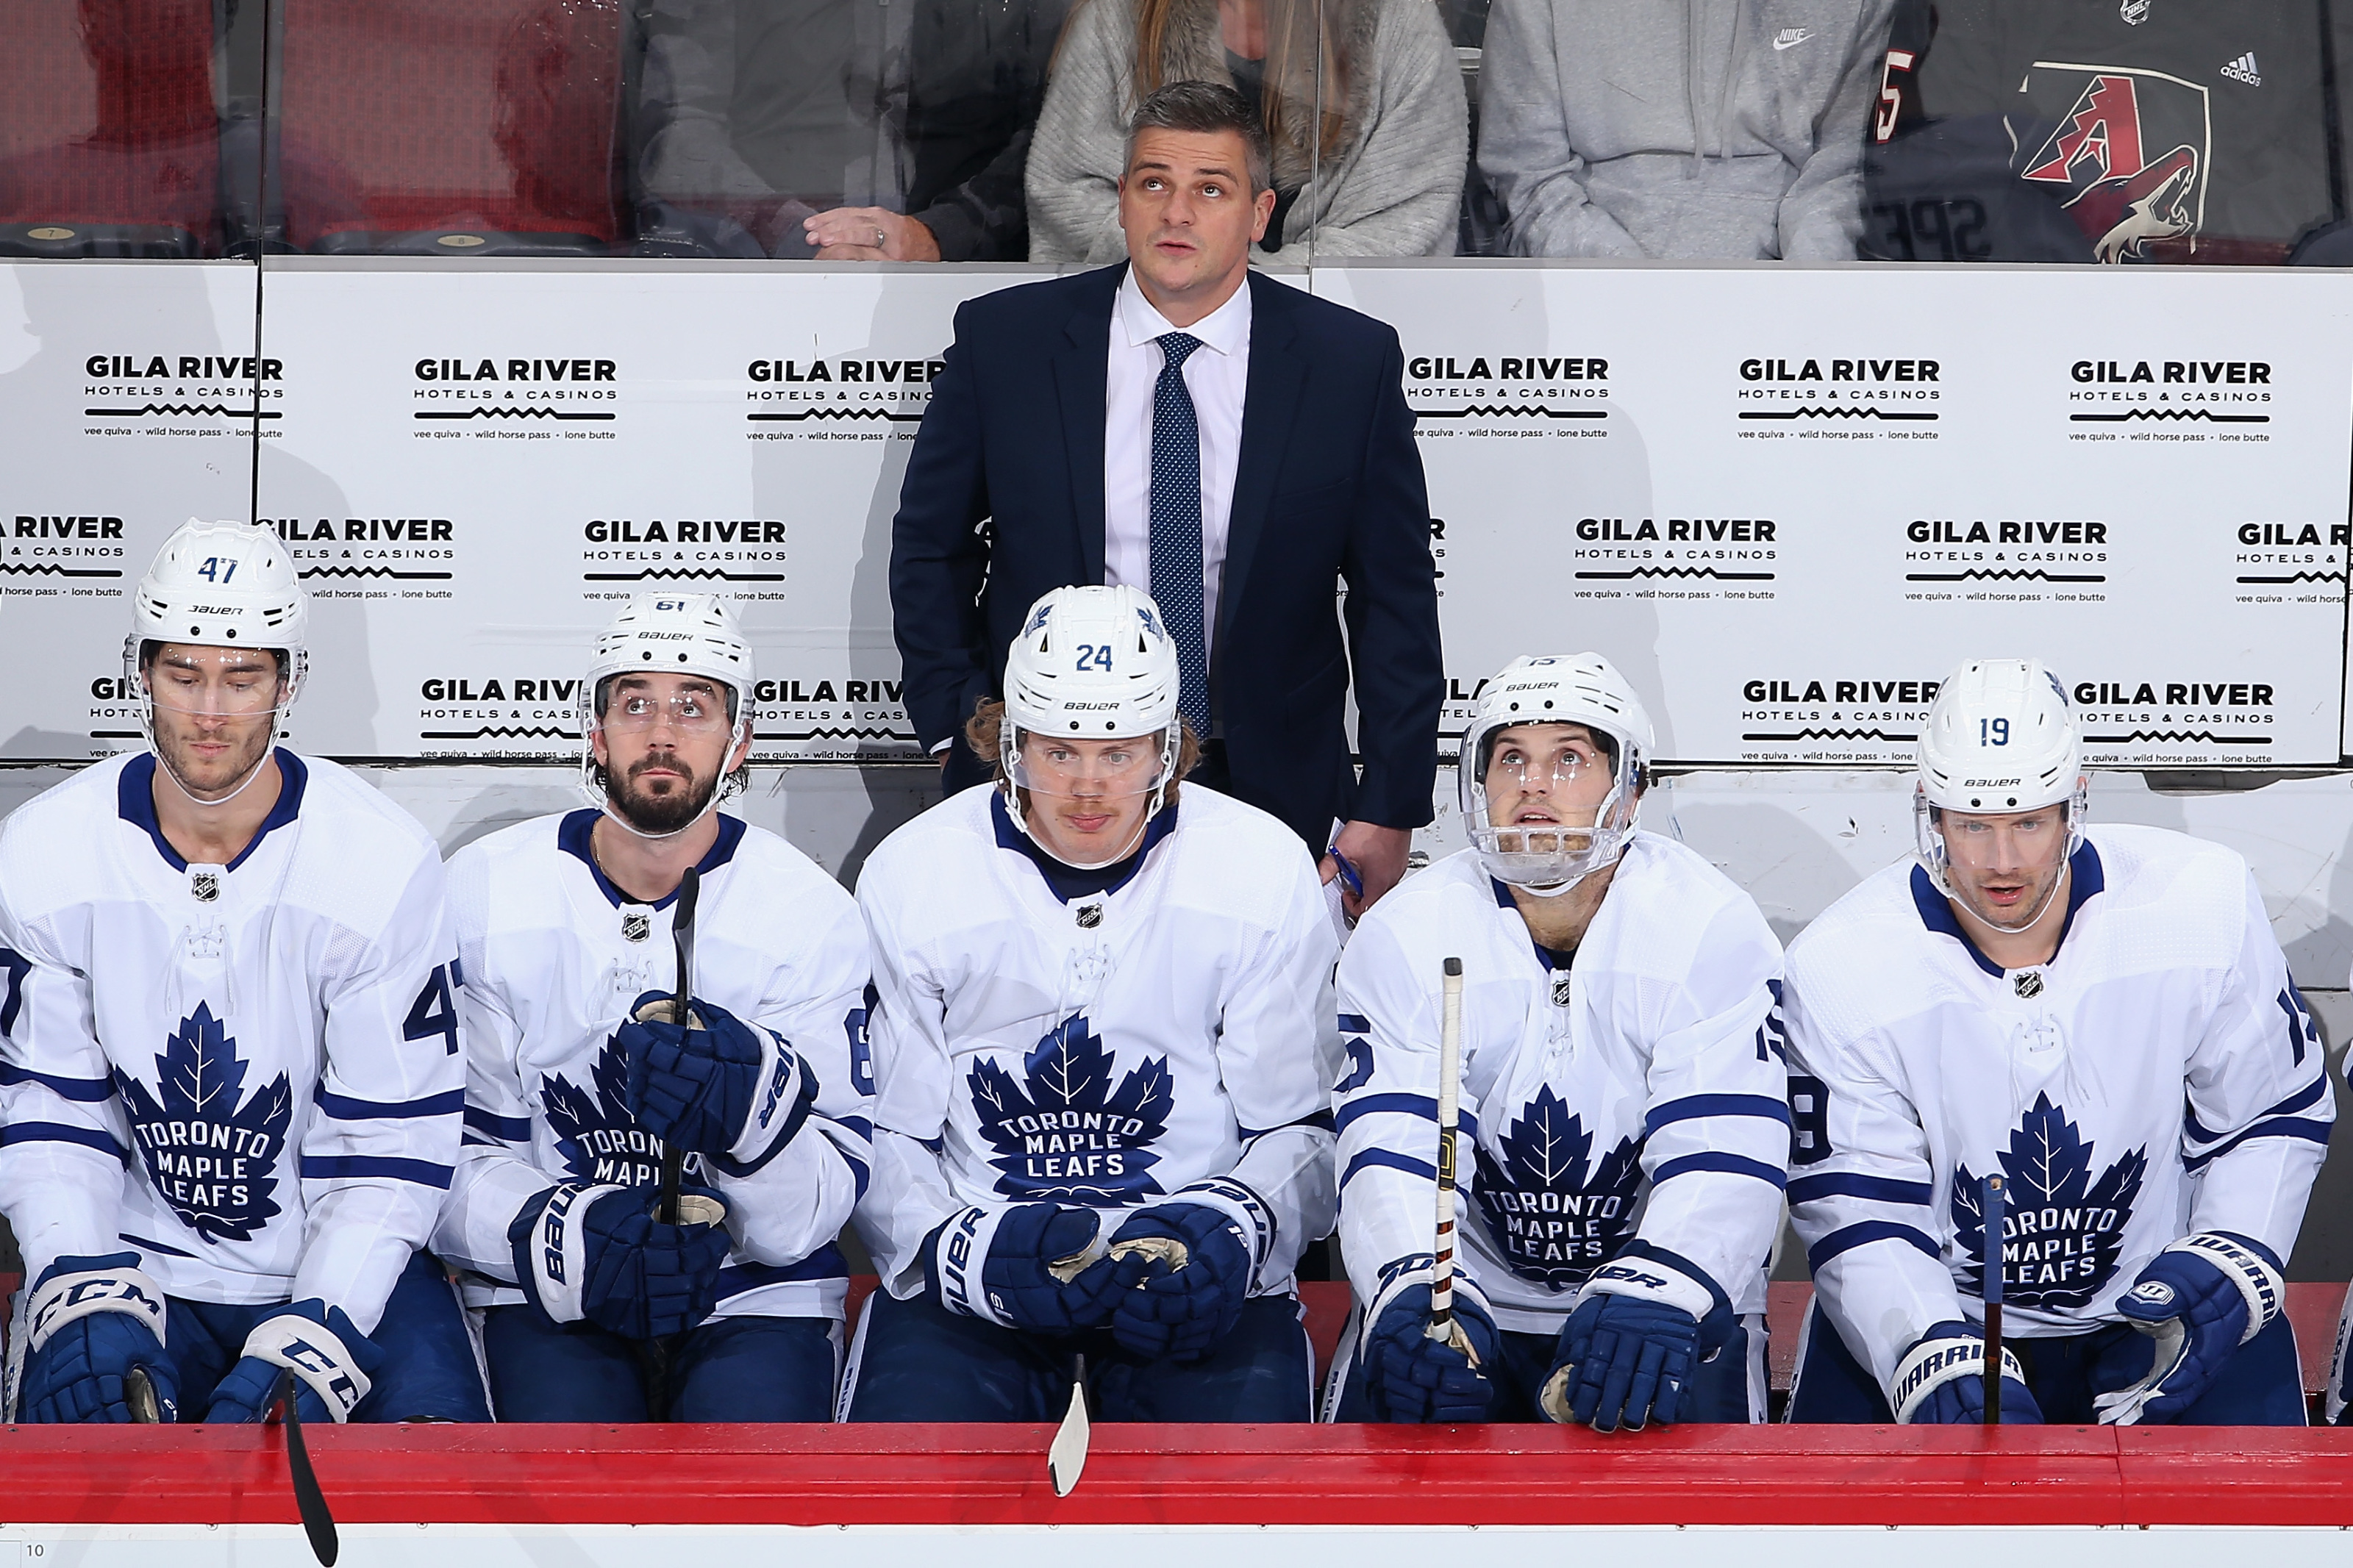 The Beginner's Guide to the 2020-21 Toronto Maple Leafs: The Team